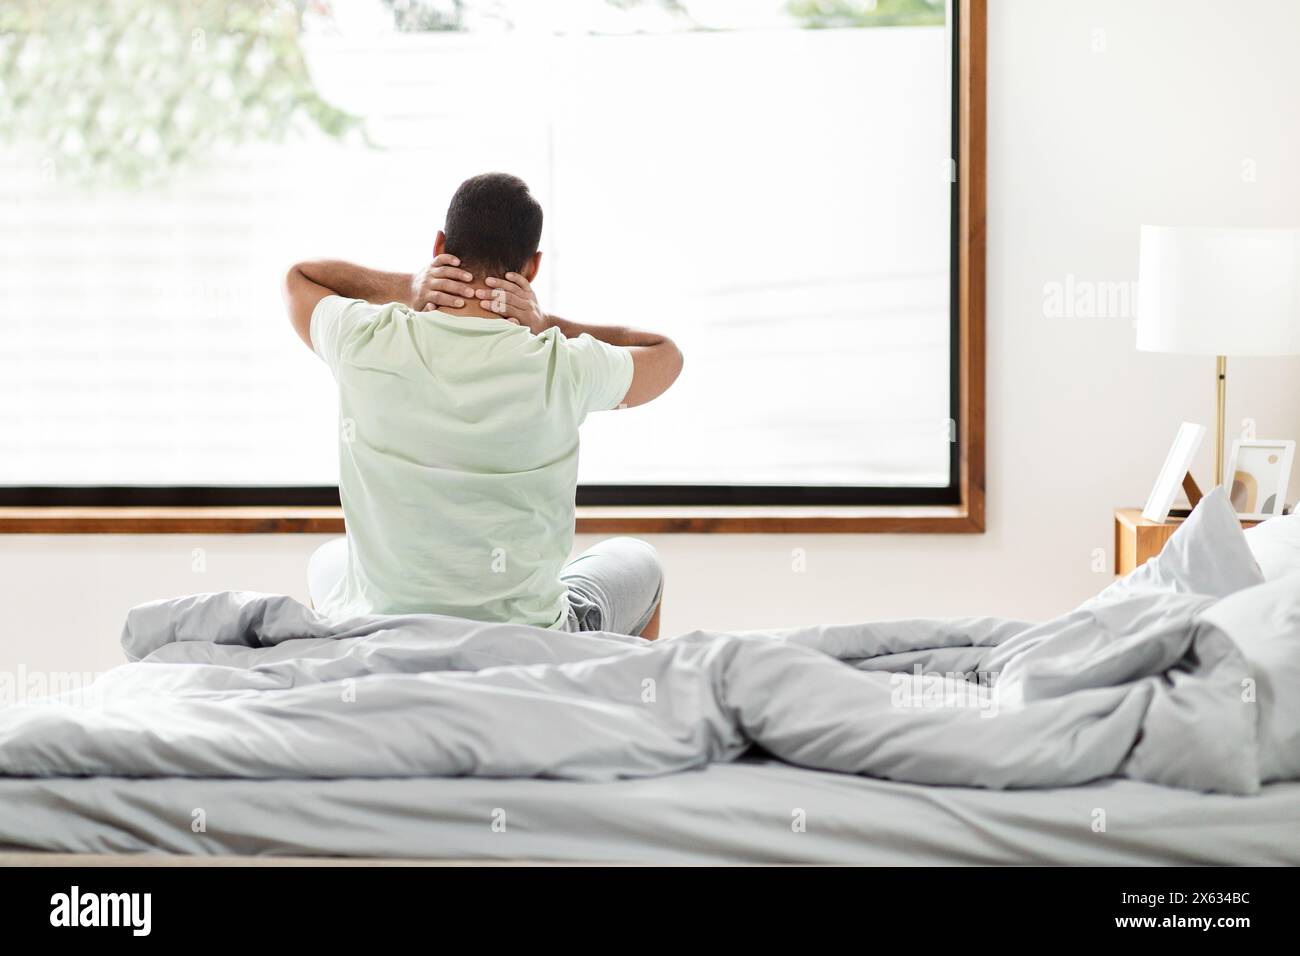 Man Enjoying Relaxing Morning Stretch in a Bright, Sunlit Bedroom Stock Photo